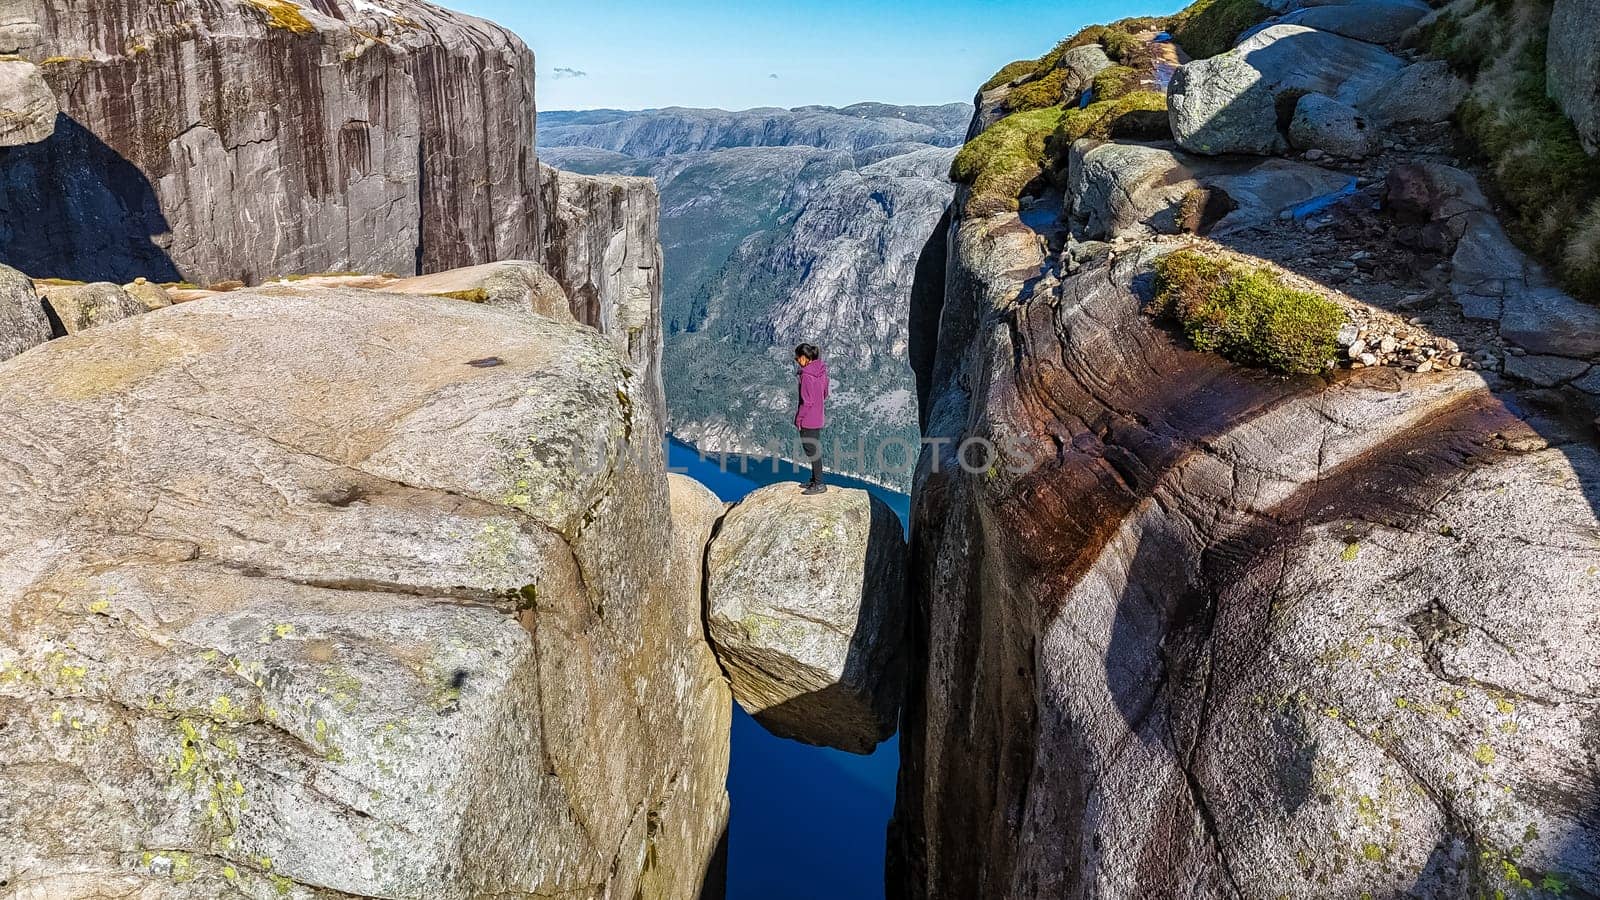 A lone hiker stands on the edge of the iconic Kjeragbolten cliff in Norway, gazing out at the breathtaking landscape below by fokkebok